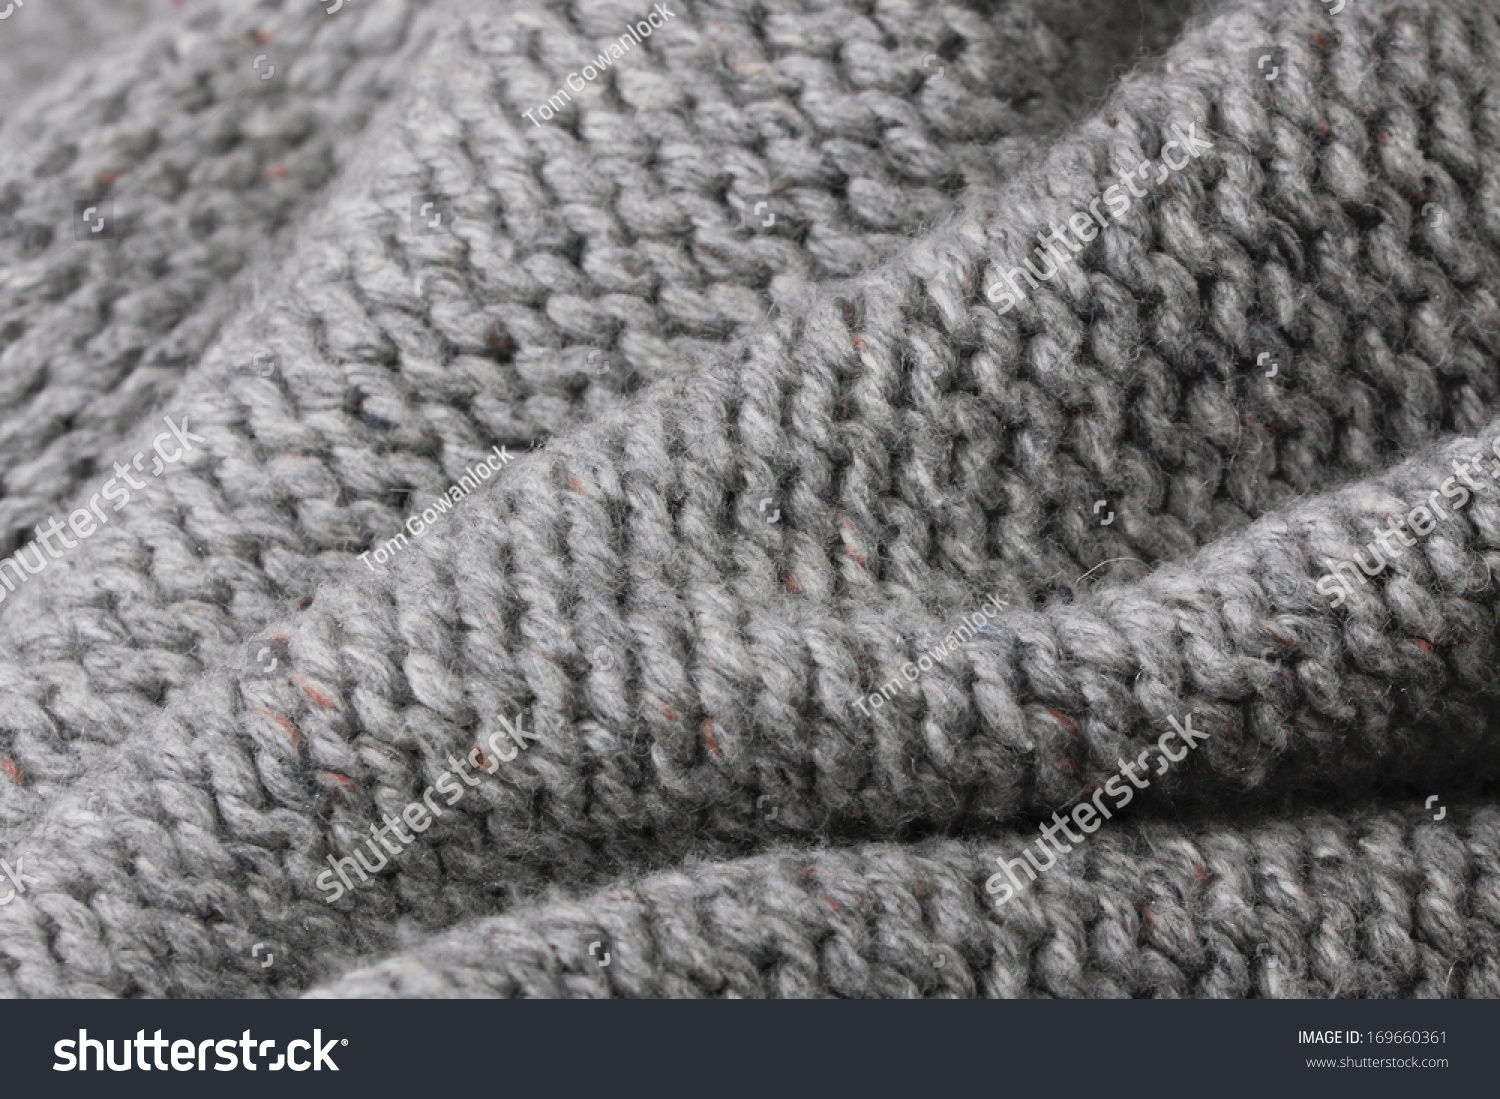 Close Up Of Folded Wool Material With Shallow Depth Of Field Stock ...